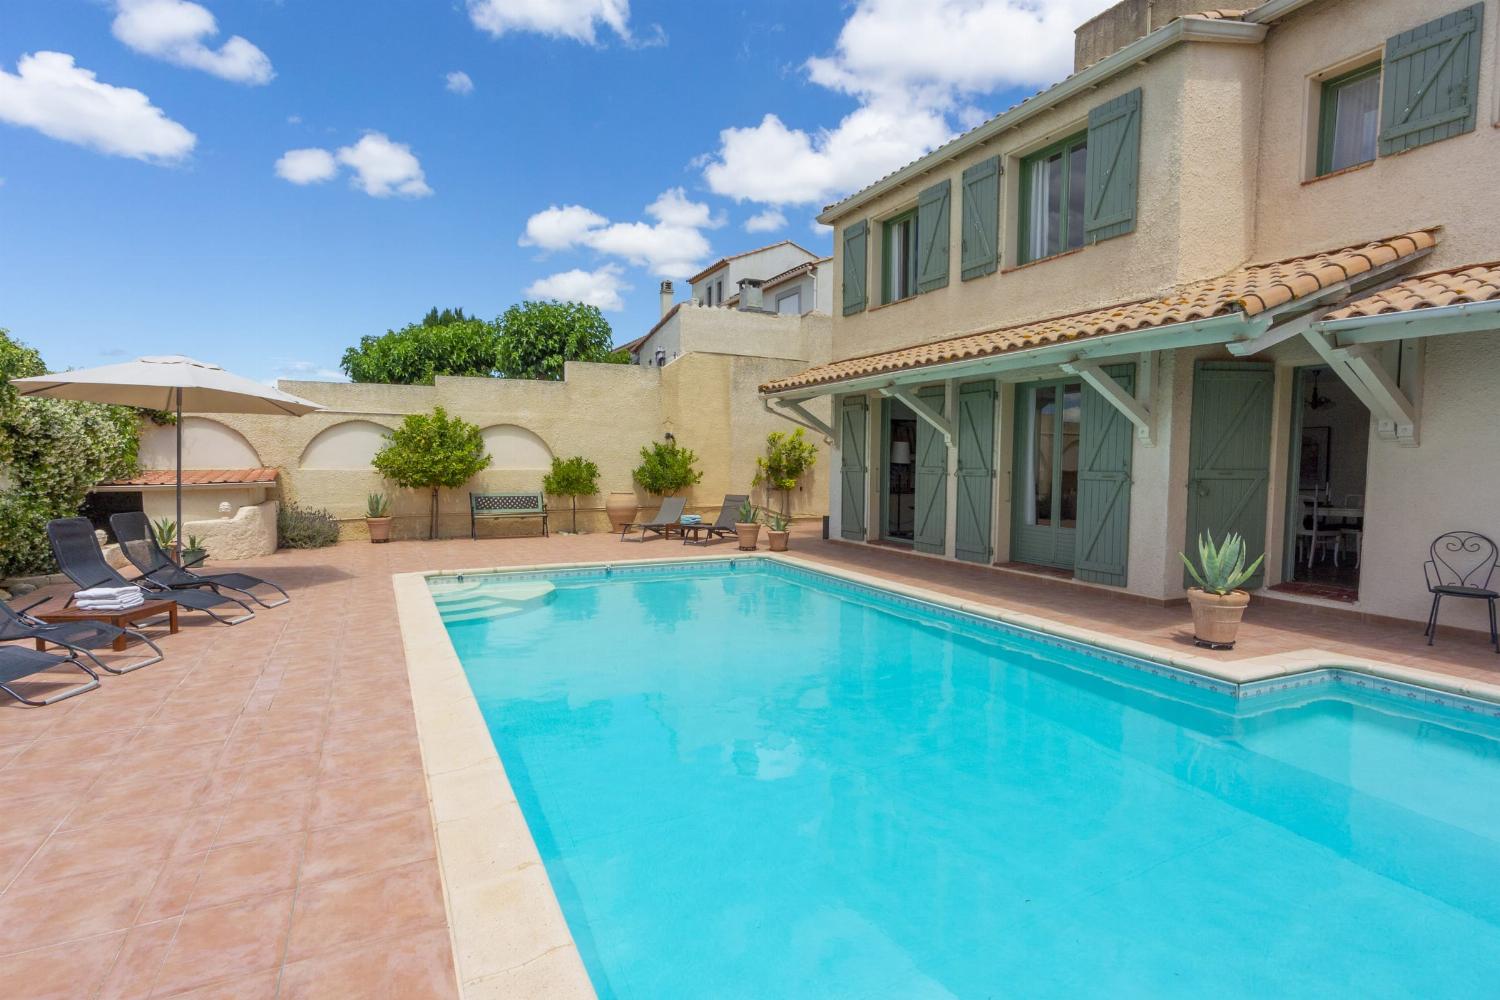 Rental home in South of France with private heated pool